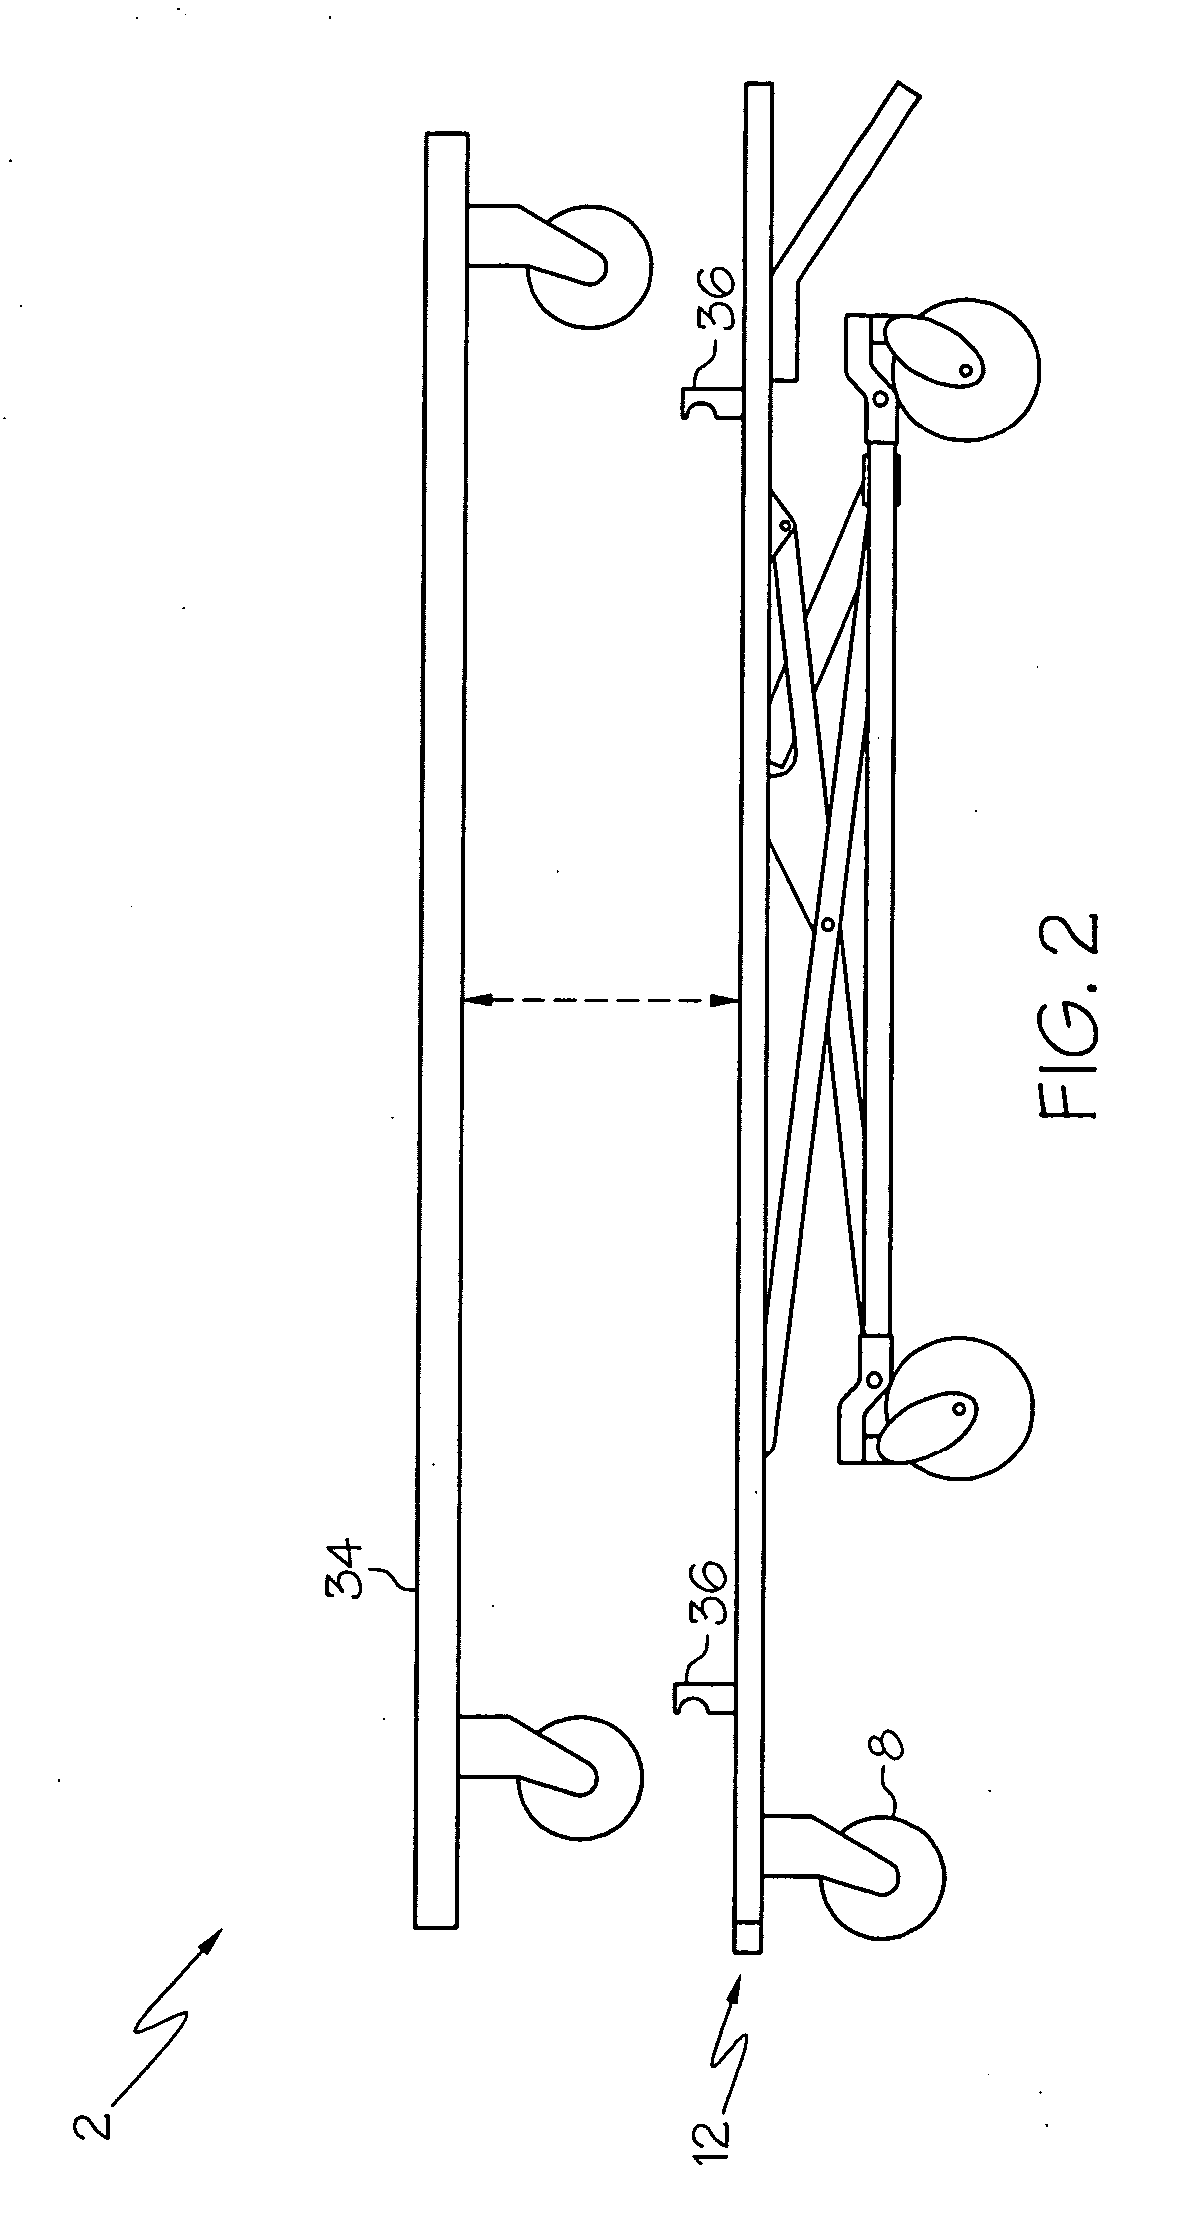 Charging system for recharging a battery of an electrohydraulically powered lift ambulance cot with an electrical system of an emergency vehicle